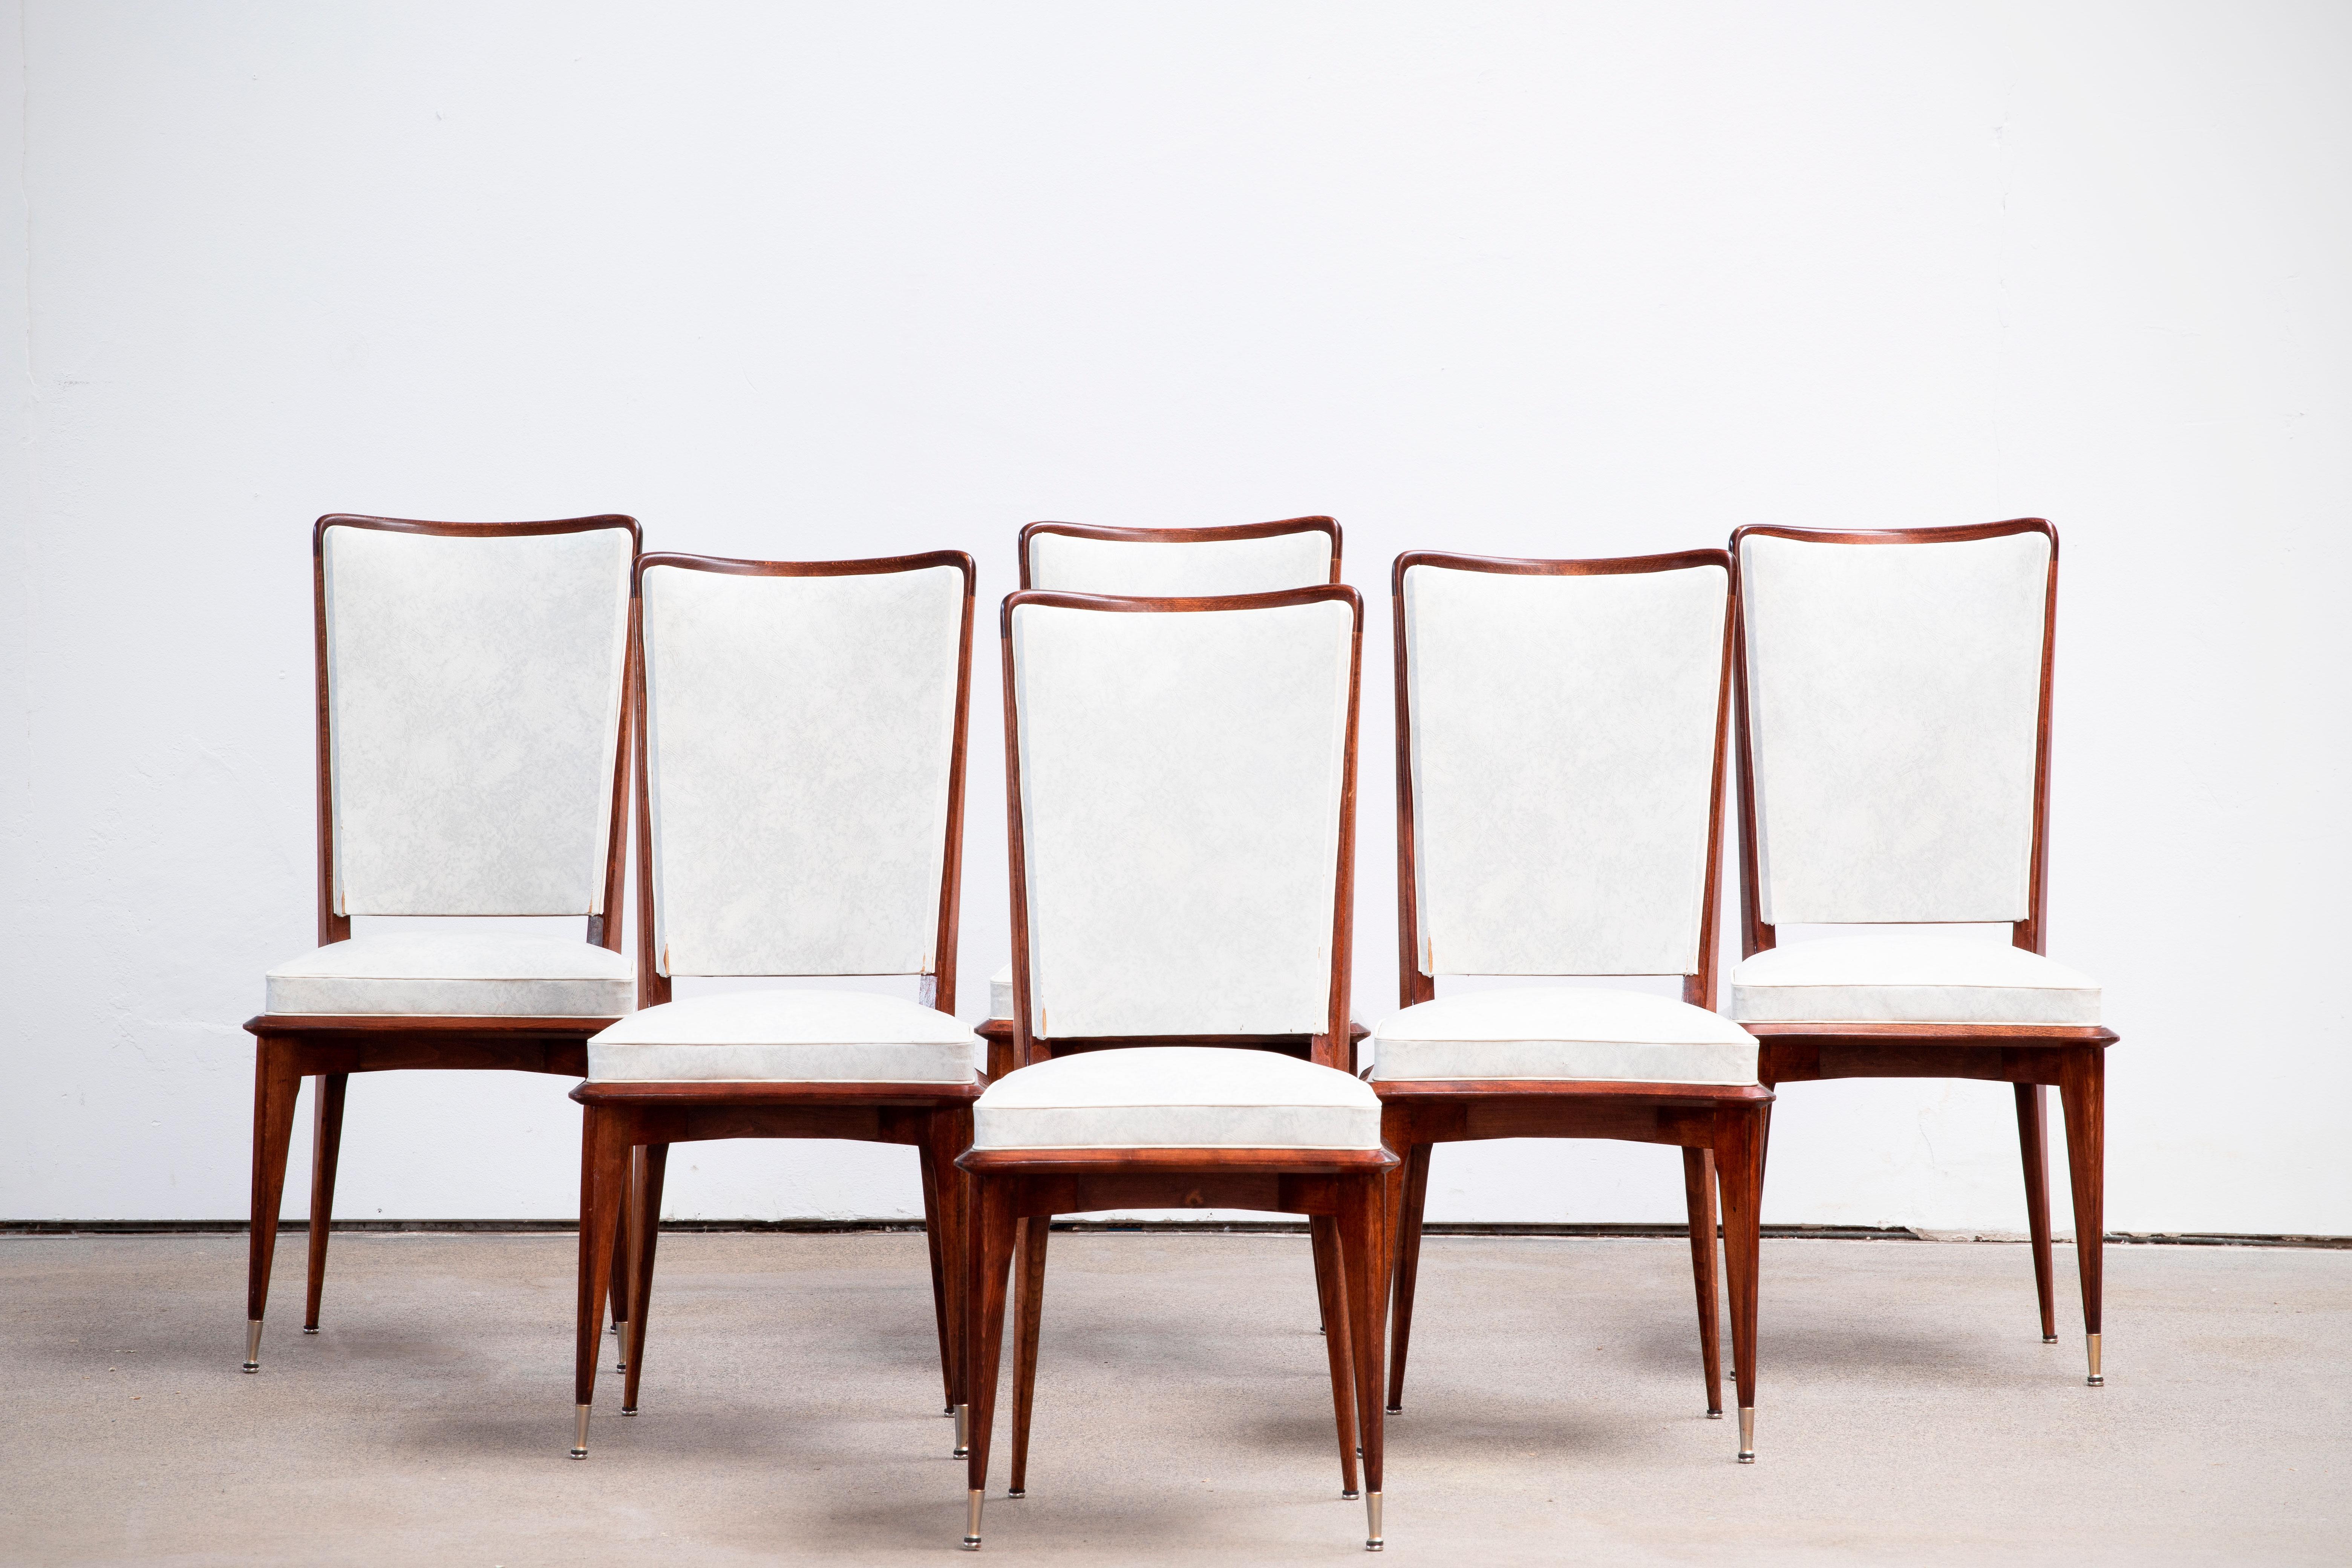 French Art Deco Set of 6 Chairs, France, 1940